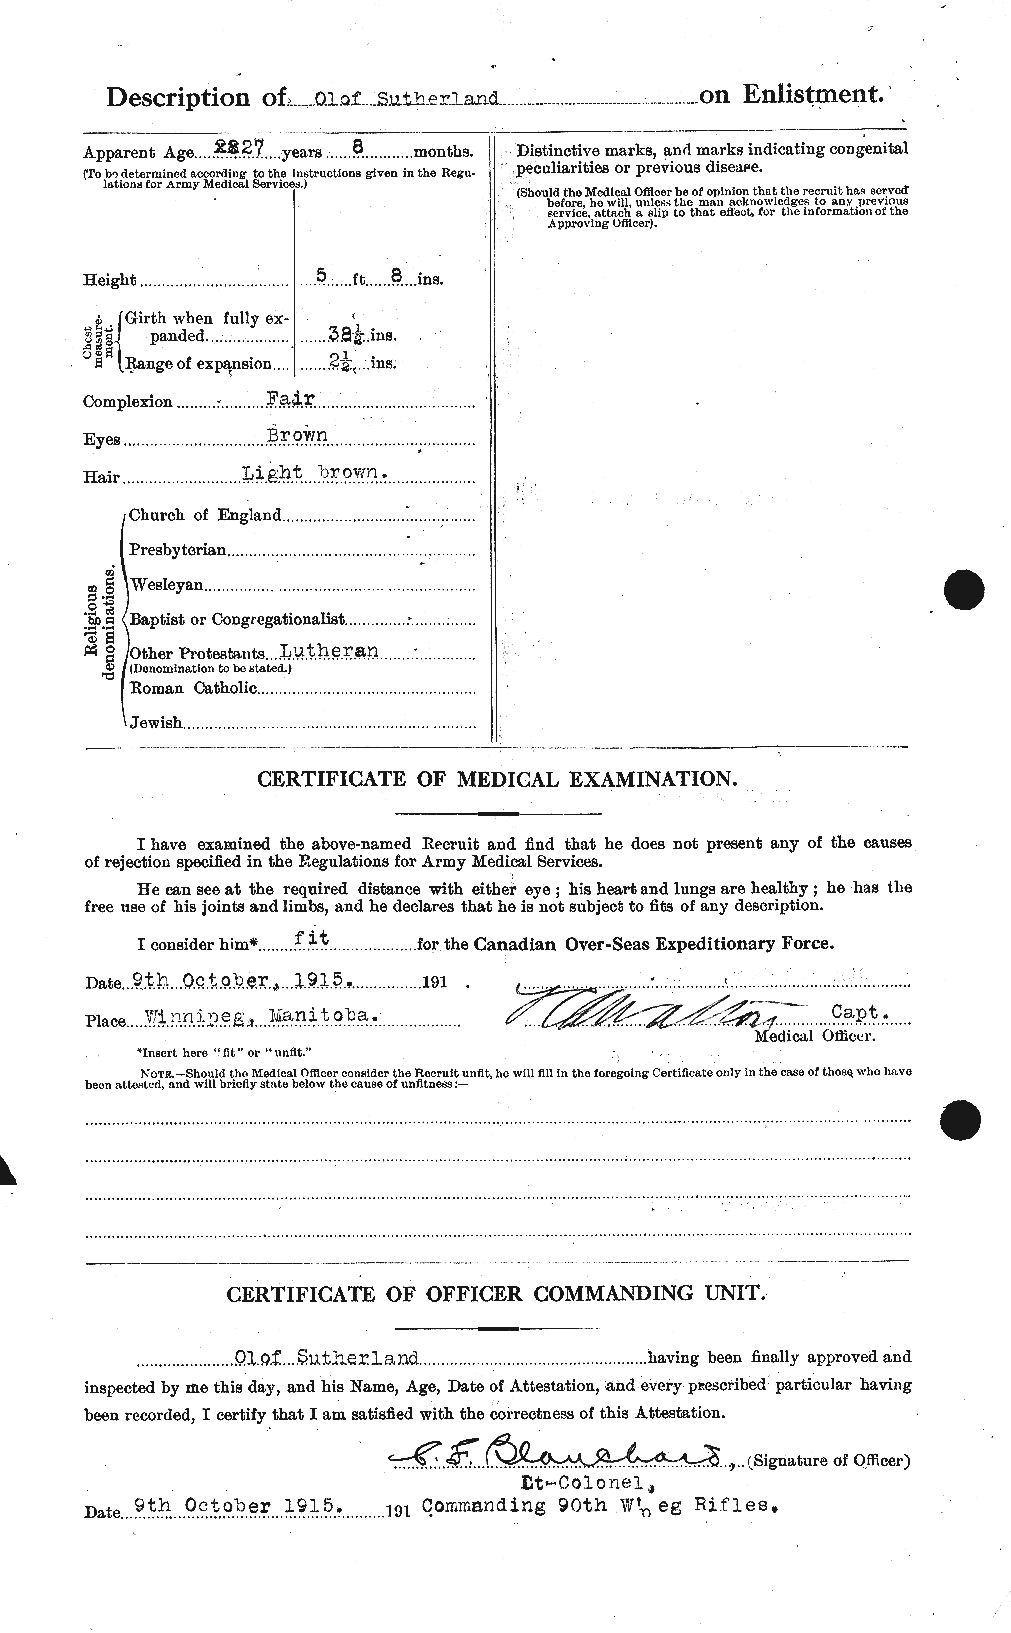 Personnel Records of the First World War - CEF 126830b